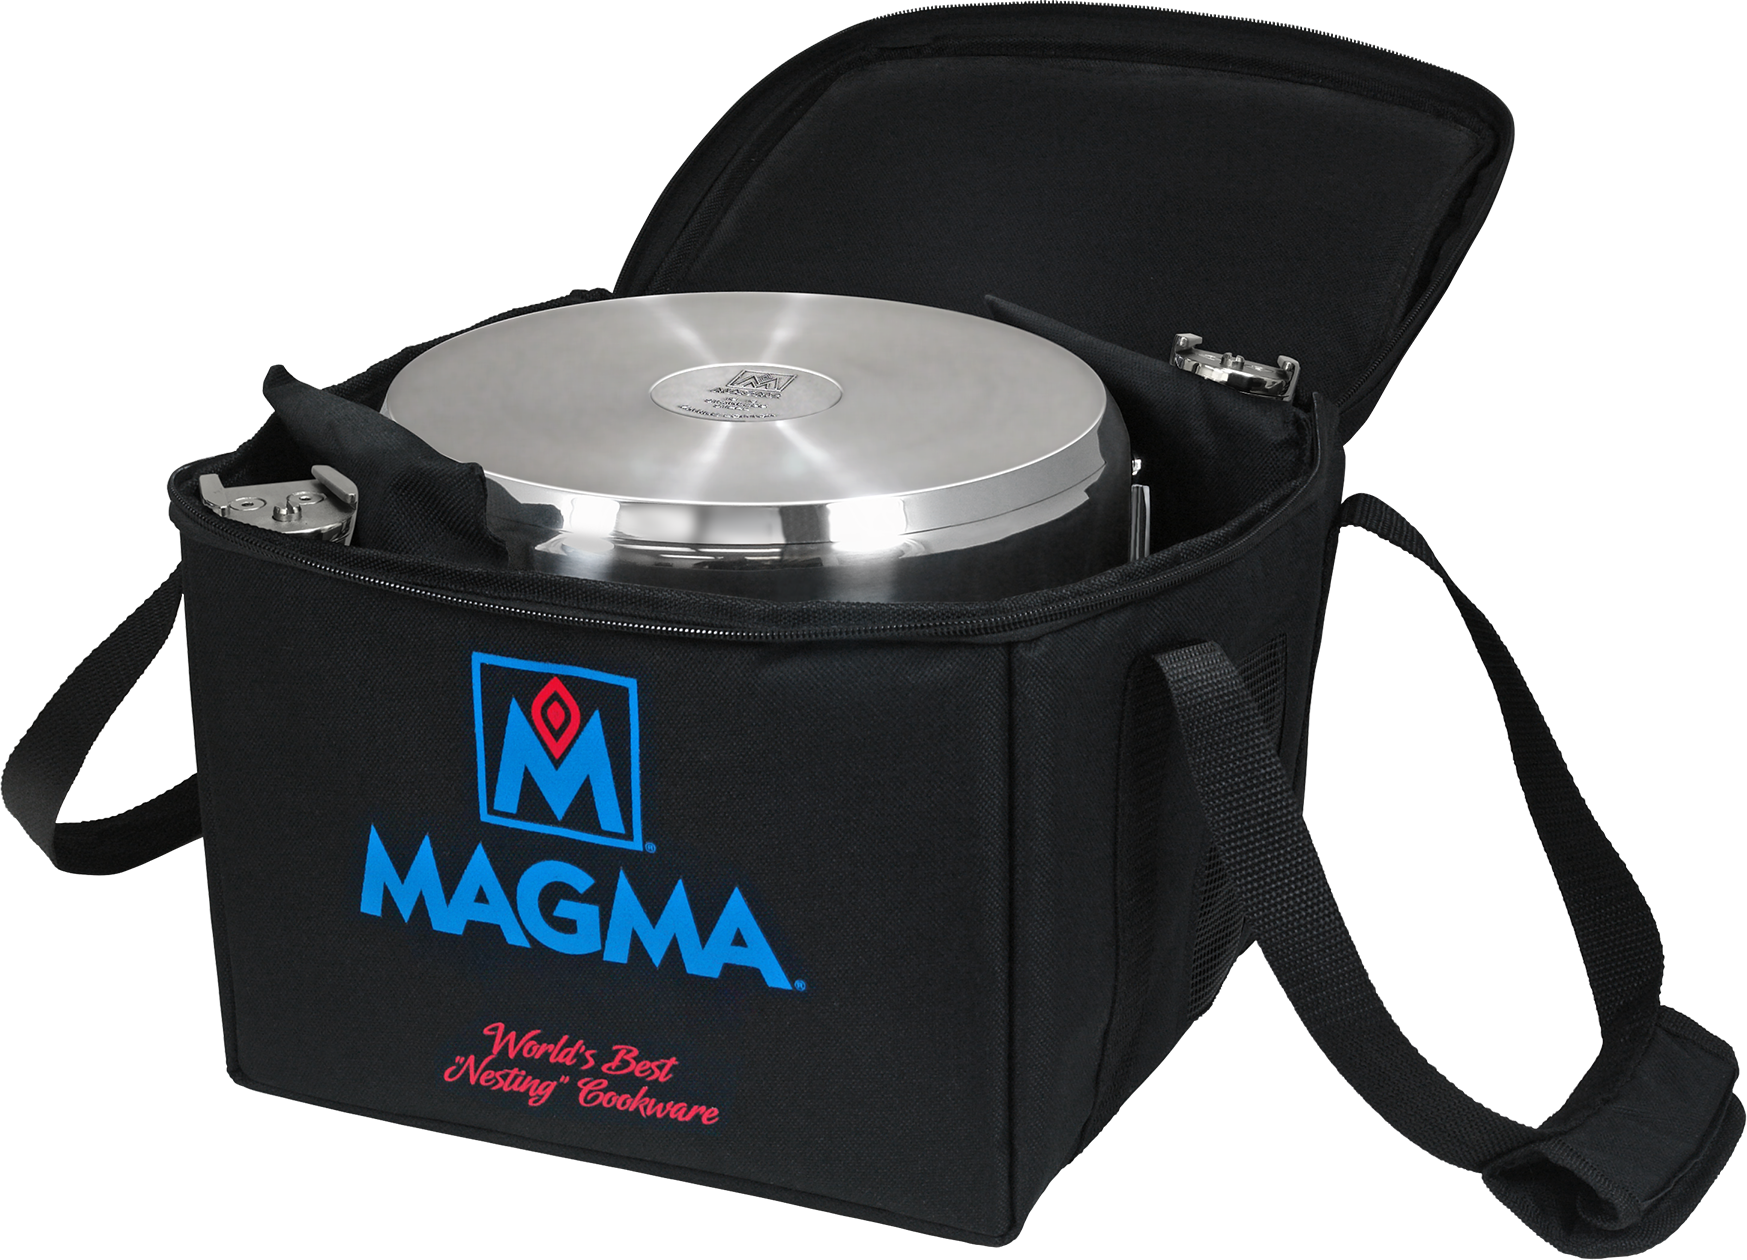  MAGMA Products, A10-360L-IND, 10 Piece Gourmet Nesting